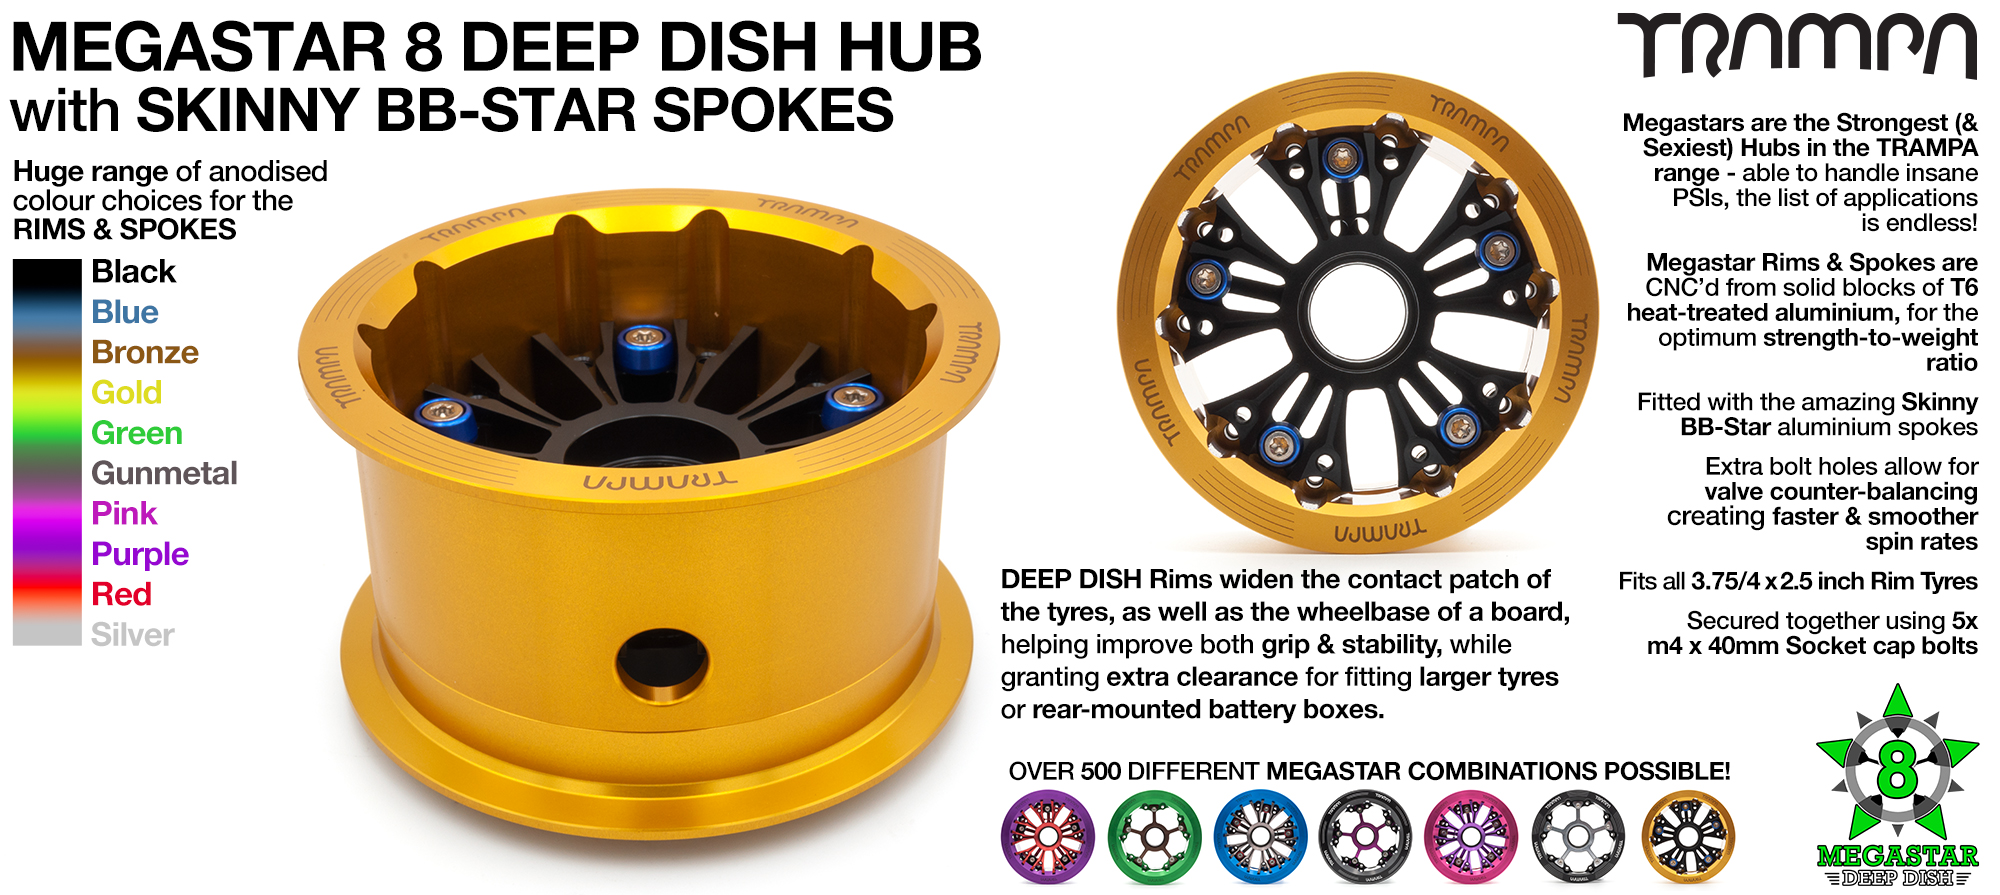 DEEP-DISH MEGASTAR 8 Hub - Fits Pneumatic tyres up to 8 Inches in outer diameter. 8x 3.75 x 2.5 Inch